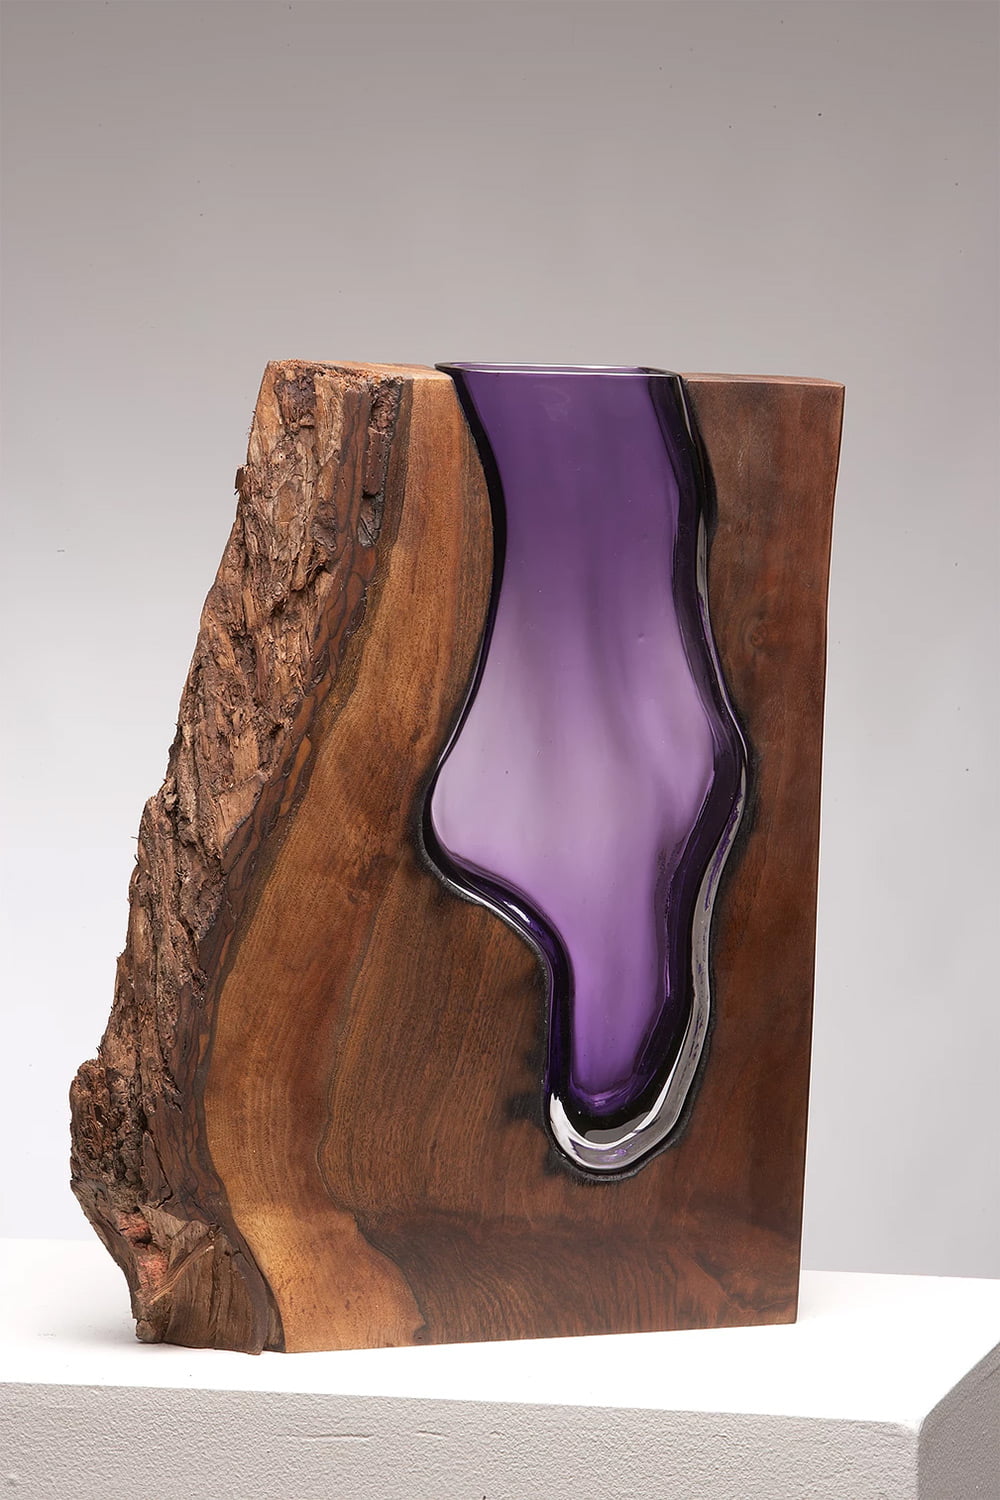 Wood Glass Glass Vases Shaped Into Wooden Enclosures By Scott Slagerman 7